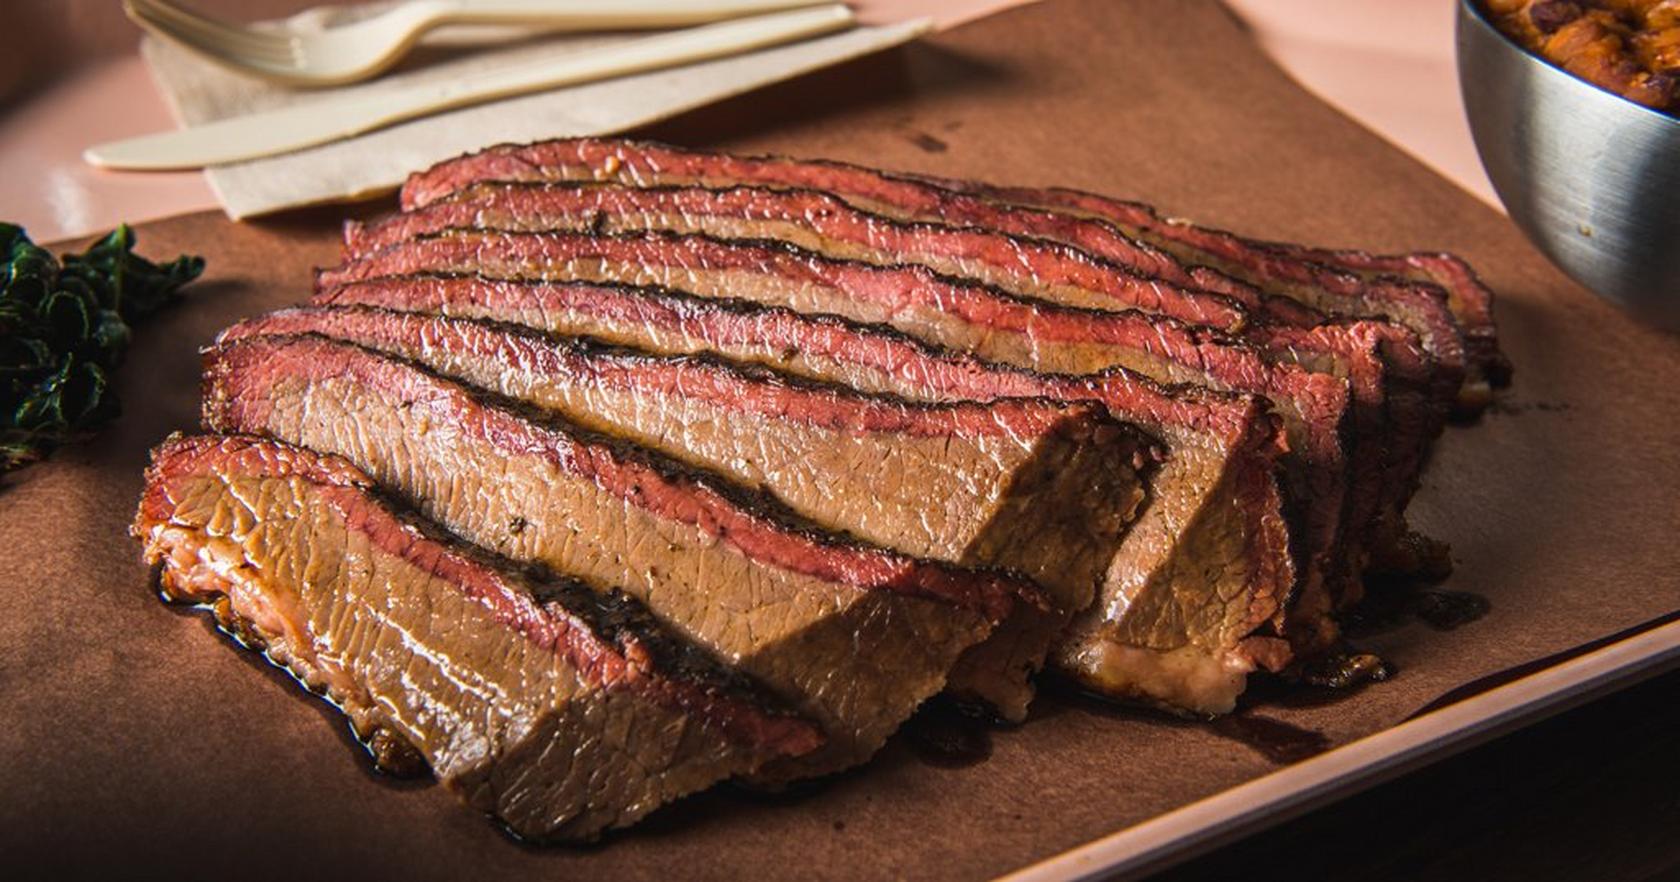 How to Make a Competition Brisket